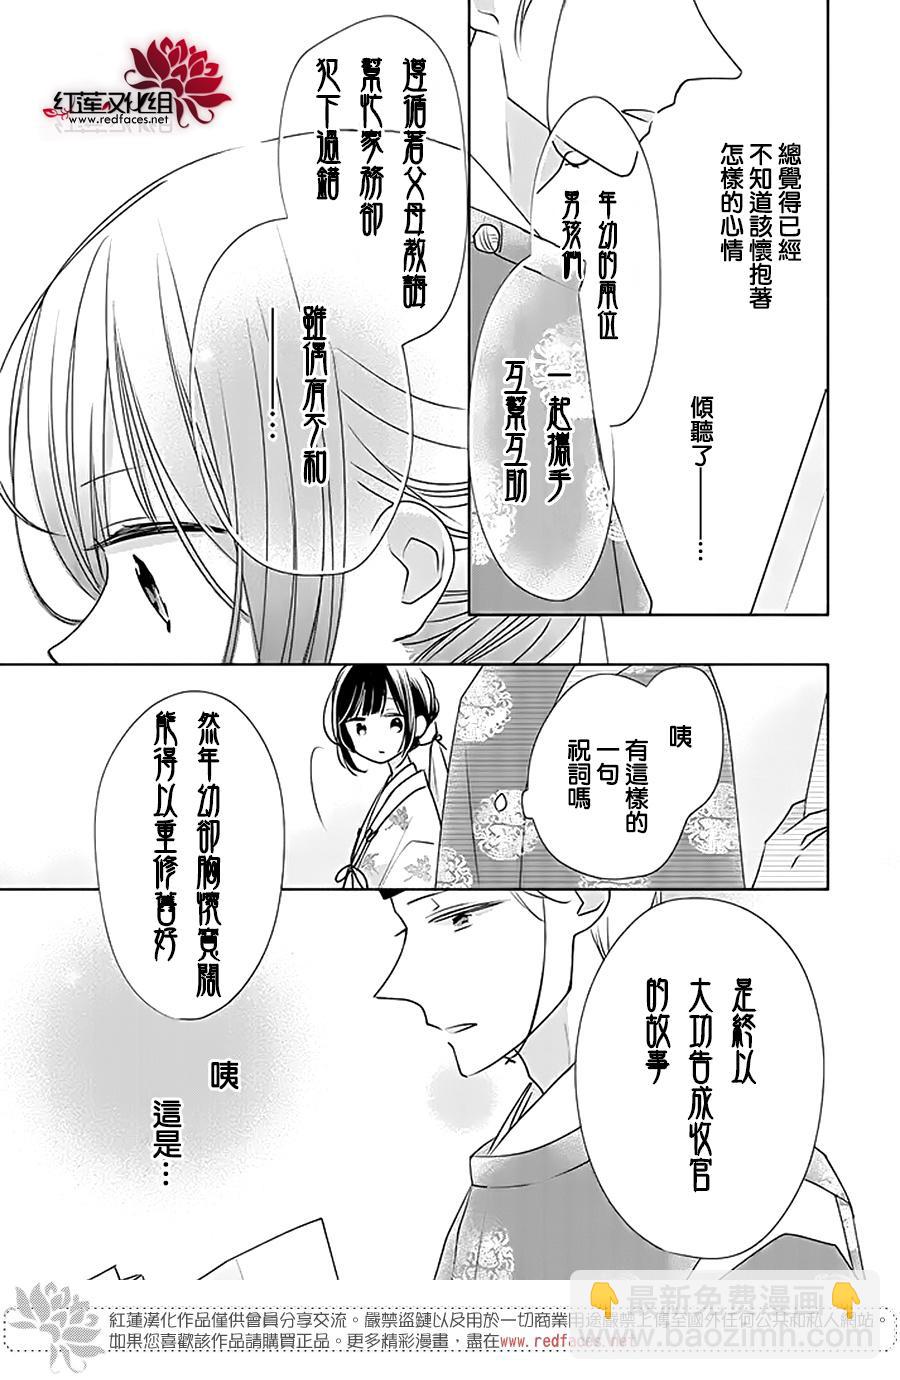 If given a second chance - 28话 - 1